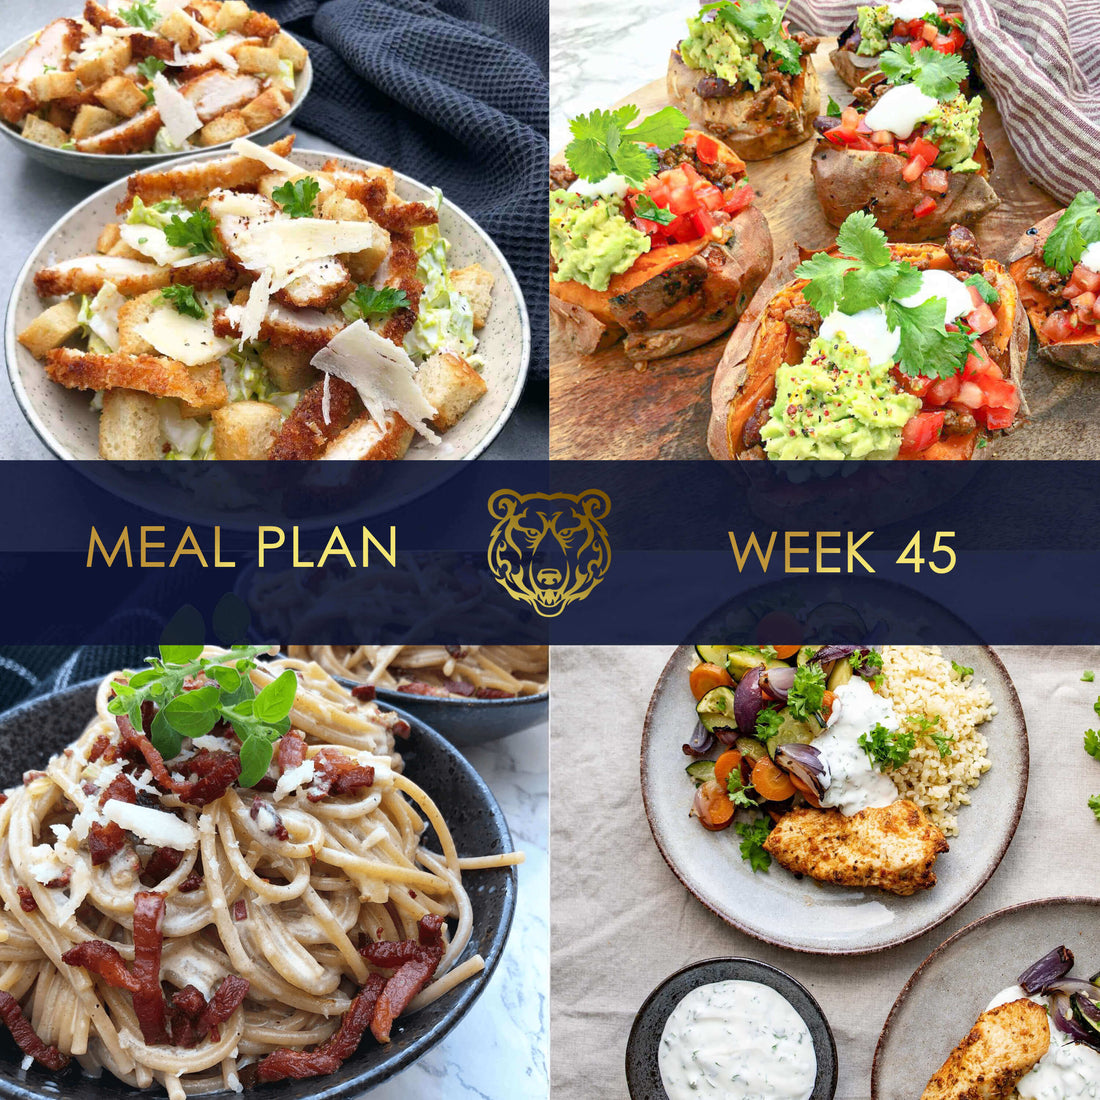 KUMA Meal Plan and Grocery List for Week 45